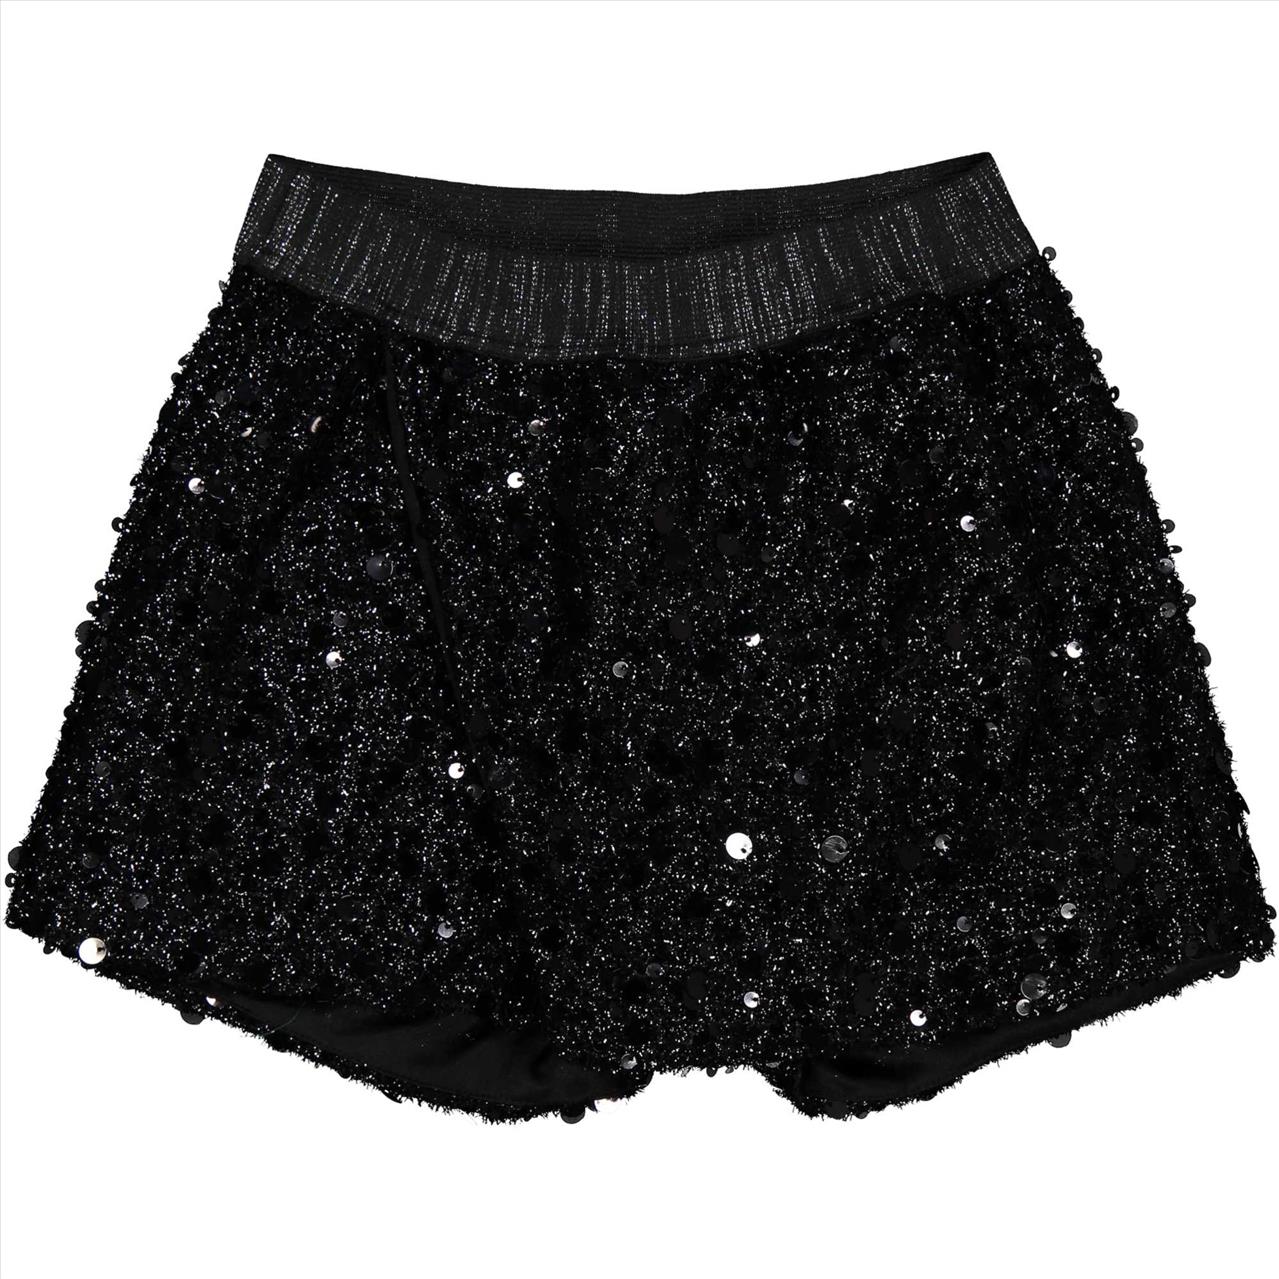 SHORTS SEQUINS BLACK TRYBEYOND GIRL S6-16